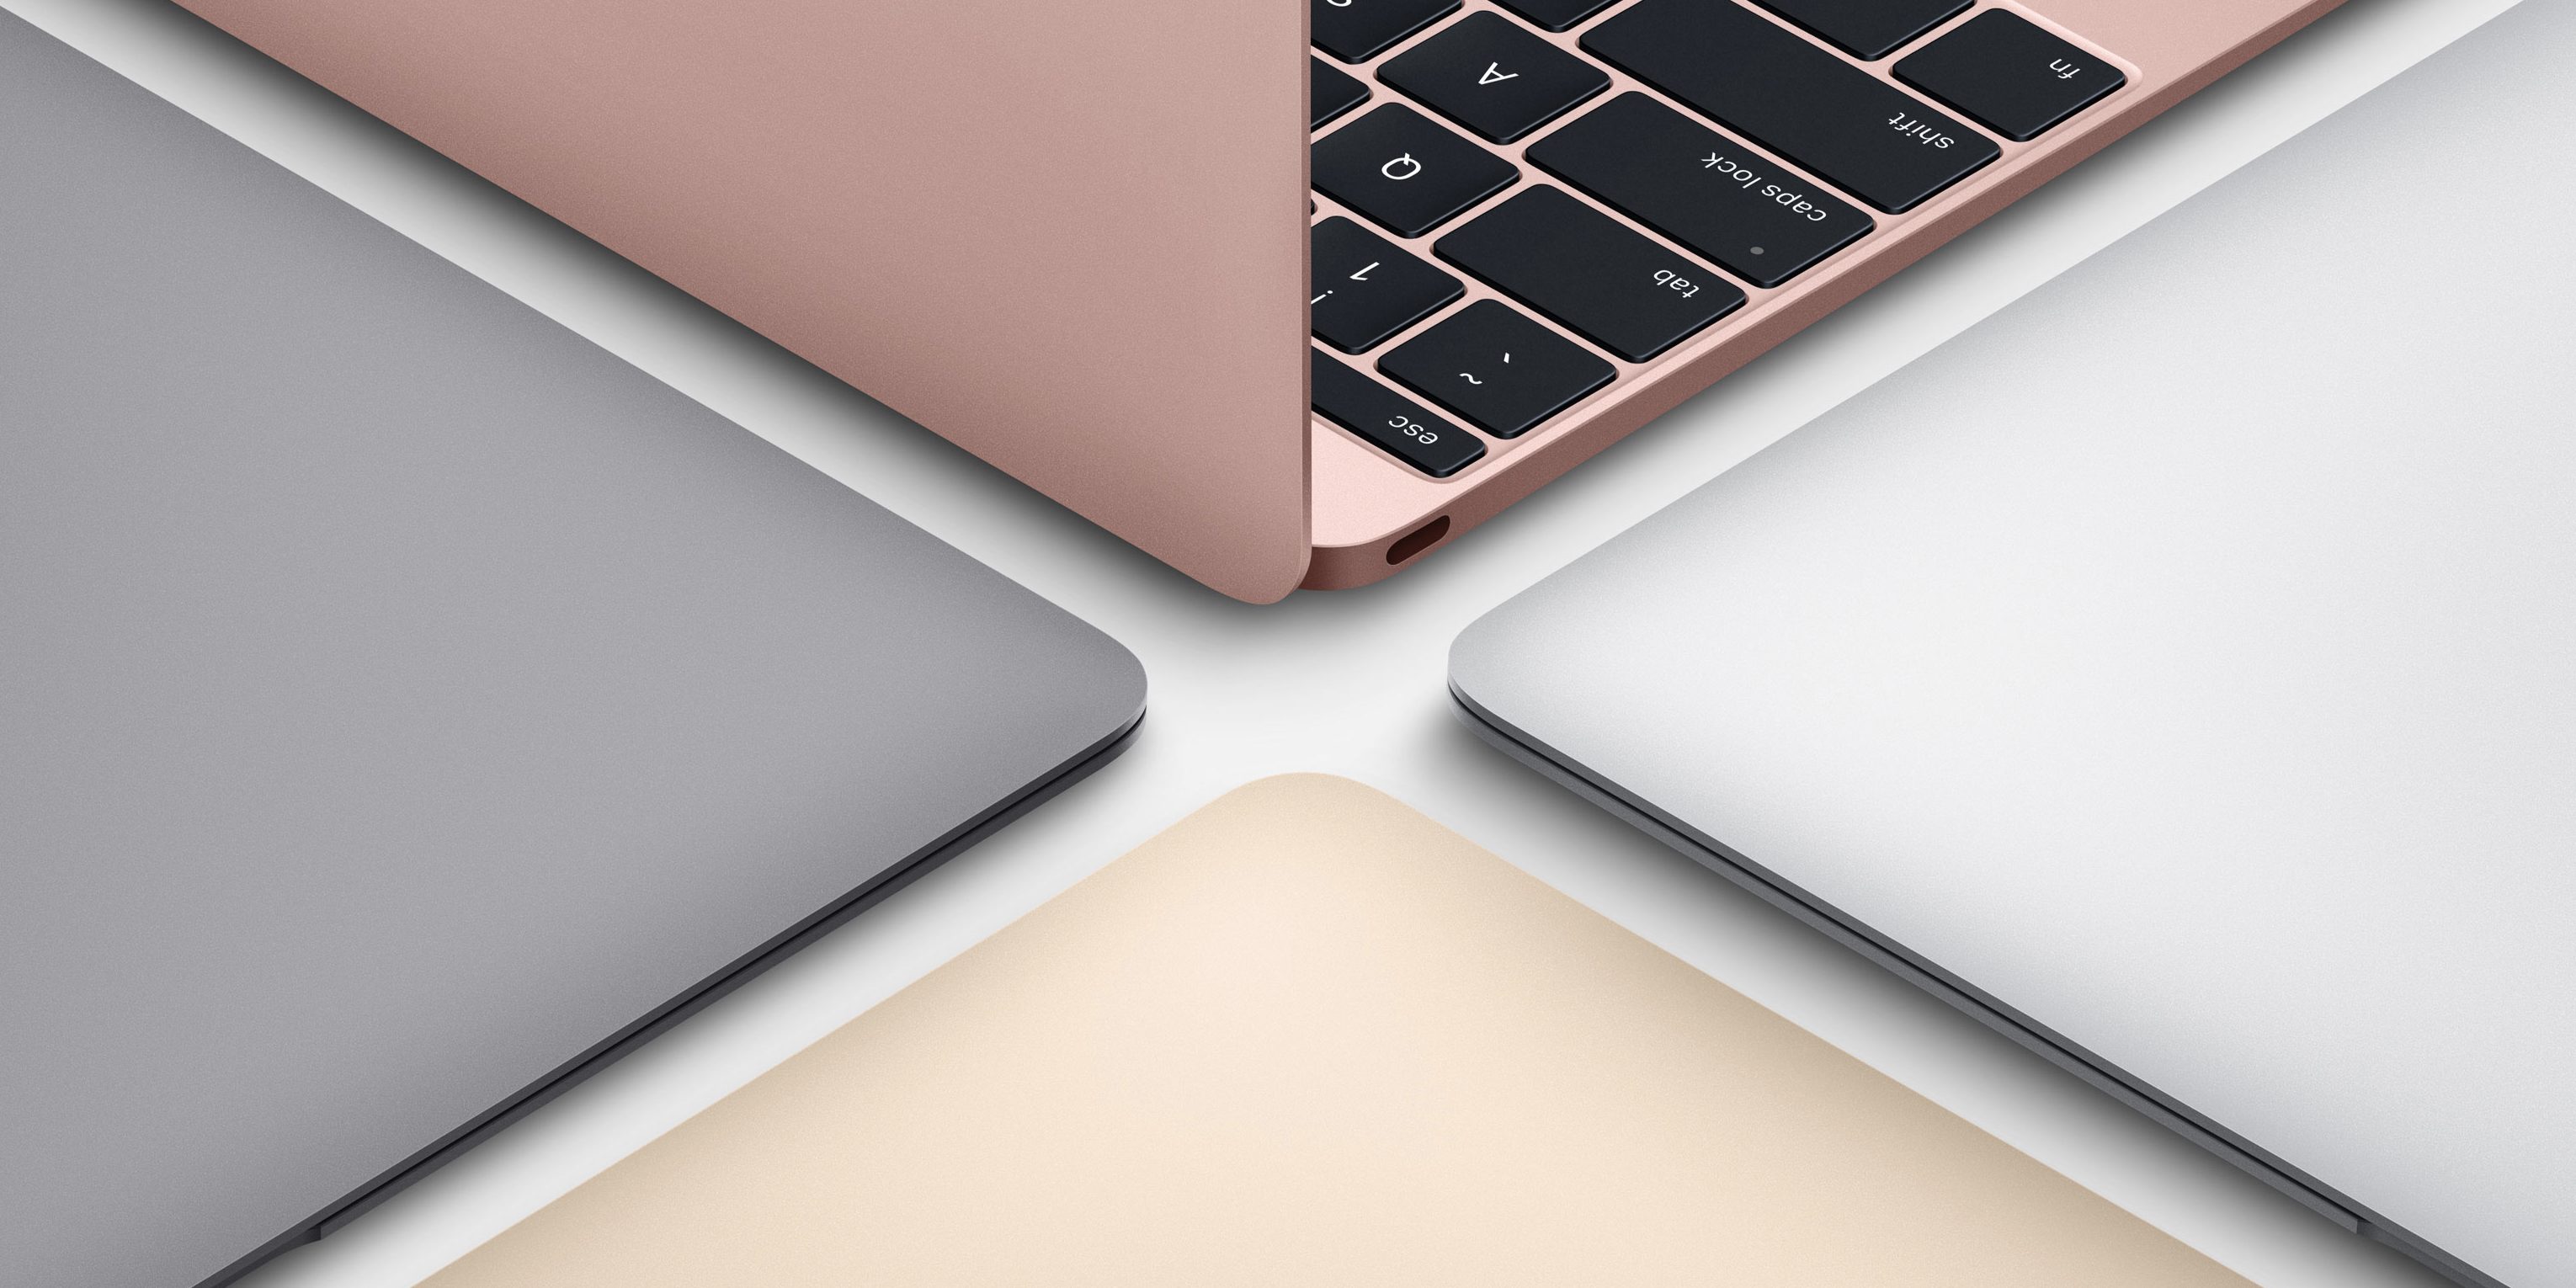 15-Inch MacBook Air Rumored for 2023, But New 12-Inch MacBook Now